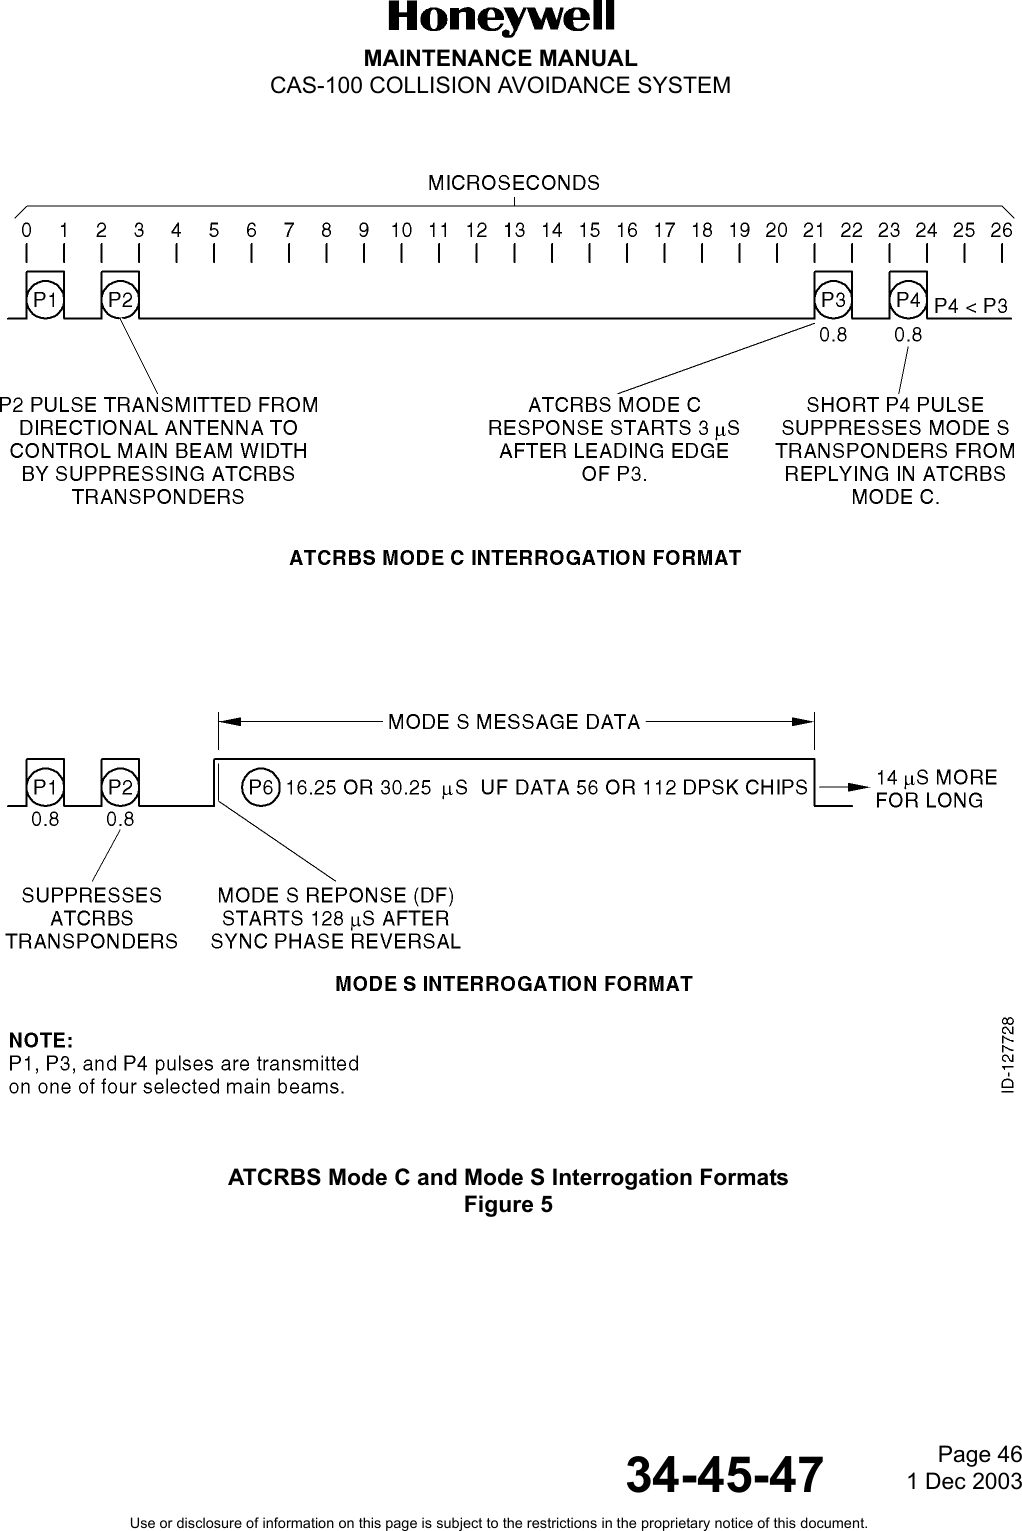 Page 461 Dec 200334-45-47MAINTENANCE MANUALCAS-100 COLLISION AVOIDANCE SYSTEMUse or disclosure of information on this page is subject to the restrictions in the proprietary notice of this document.ATCRBS Mode C and Mode S Interrogation FormatsFigure 5 